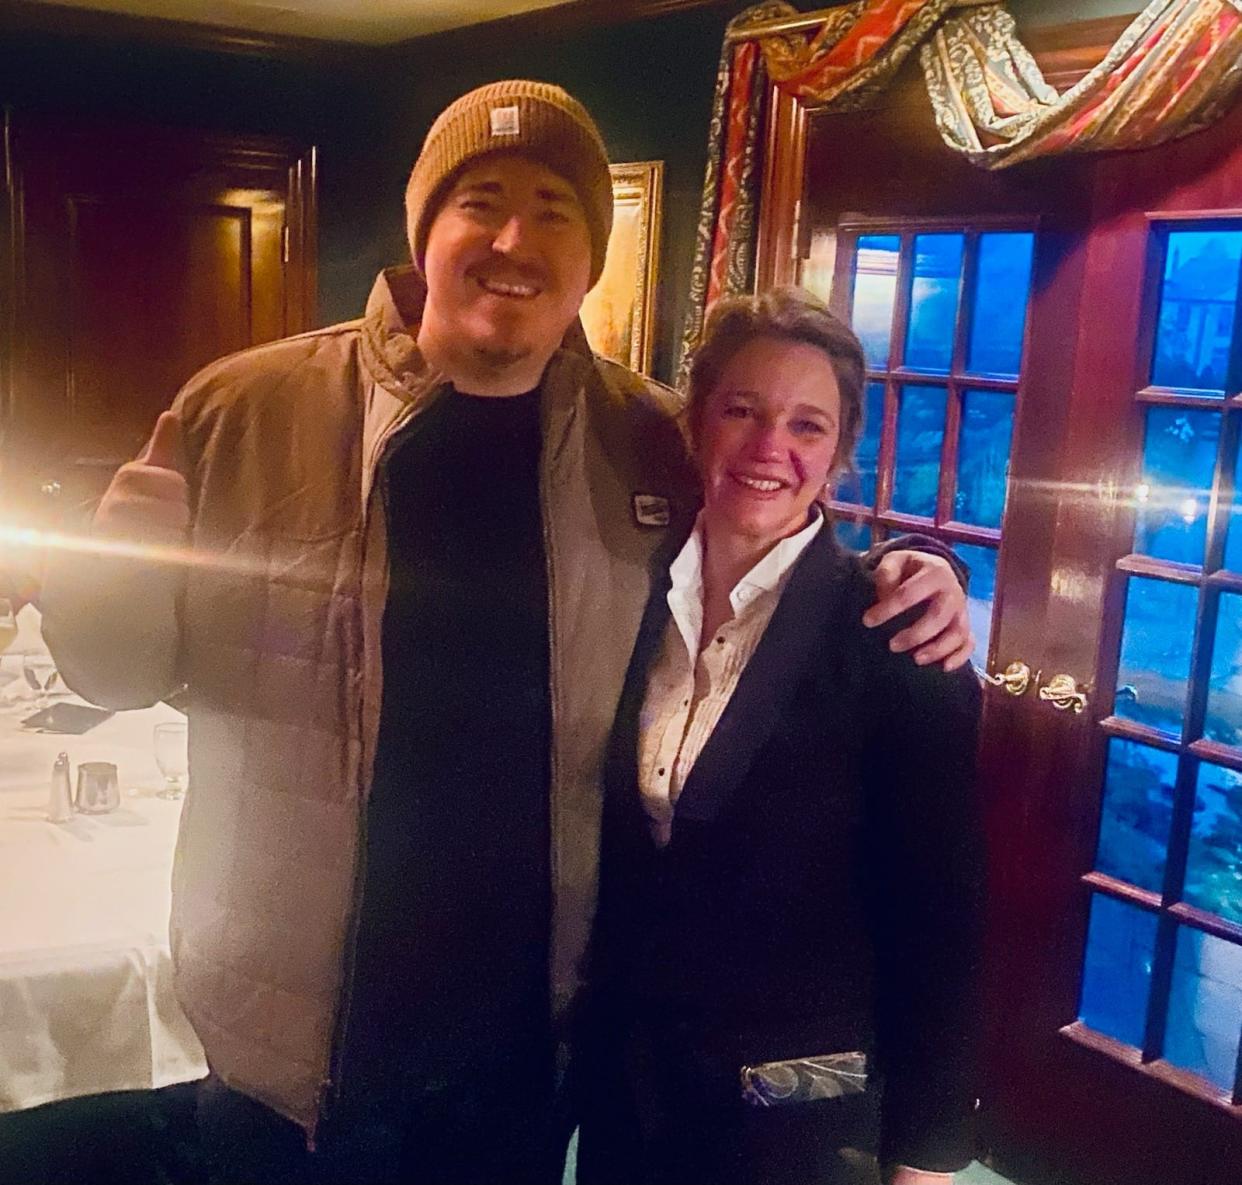 Comedian Shane Gillis poses with a staff member at Jim's Steak House in downtown Peoria.